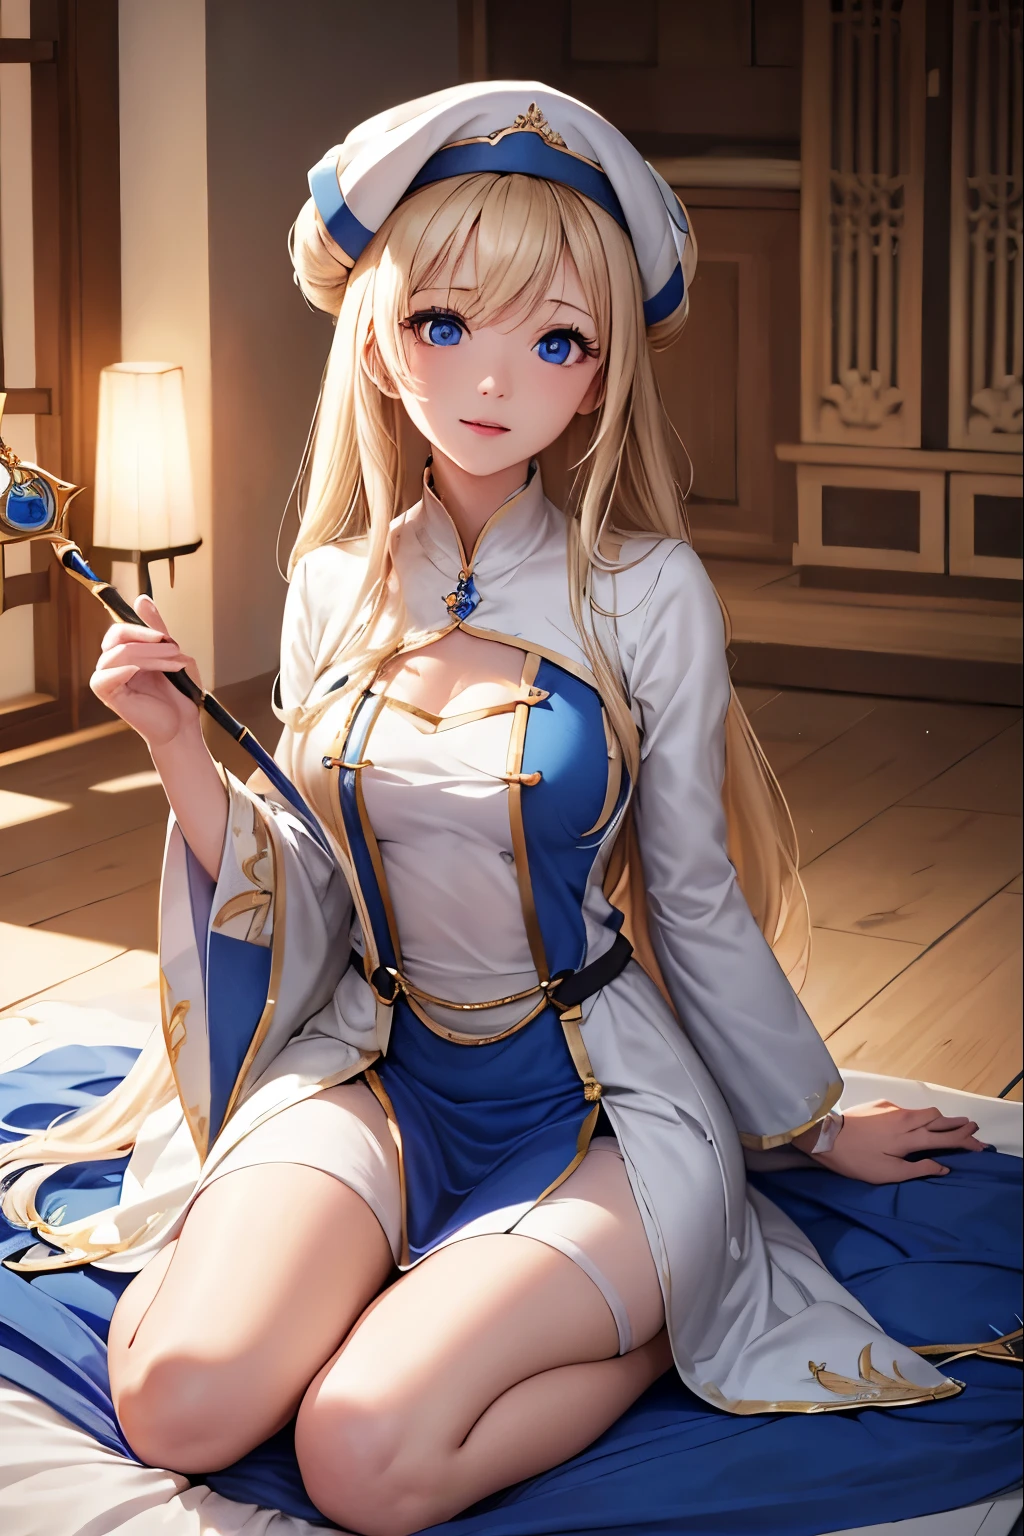 white backgrounid、Intricately detailed,[3D Images:1.35] Priestess, blondehair, Blue eyes、Kawaii Girl, full-body view、Realistic portrayal, (Best Quality,8Ｋpicturealistic,High resolution:1.2), Long hair, hat,, BREAK looking at viewer,Blake City,Blue and white robe(Queen Watts on the right、Bring the sacred staff to the fore)、 (masutepiece:1.2), Best Quality, hight resolution, Unity 8k Wallpaper, (Illustration:0.8), (Beautiful detailed eyes:1.6), extra detailed face, Perfect Lighting, extremely details CG, (Perfect hands, Perfect Anatomy),extremely details CG、perfect detailed、very delicate light、Fine and detailed eyes and detailed face Beautiful detailed eyes、(Detailed body)、A detailed face、(colourfull)、beautiful detailed hair、See here,[3D Images:1.35] Priestess, blondehair, Blue eyes、、Chain mail on the body、Kawaii Girl, full-body view、a black skirt, ((beautiful legs)), ((Stilet Heels)),
